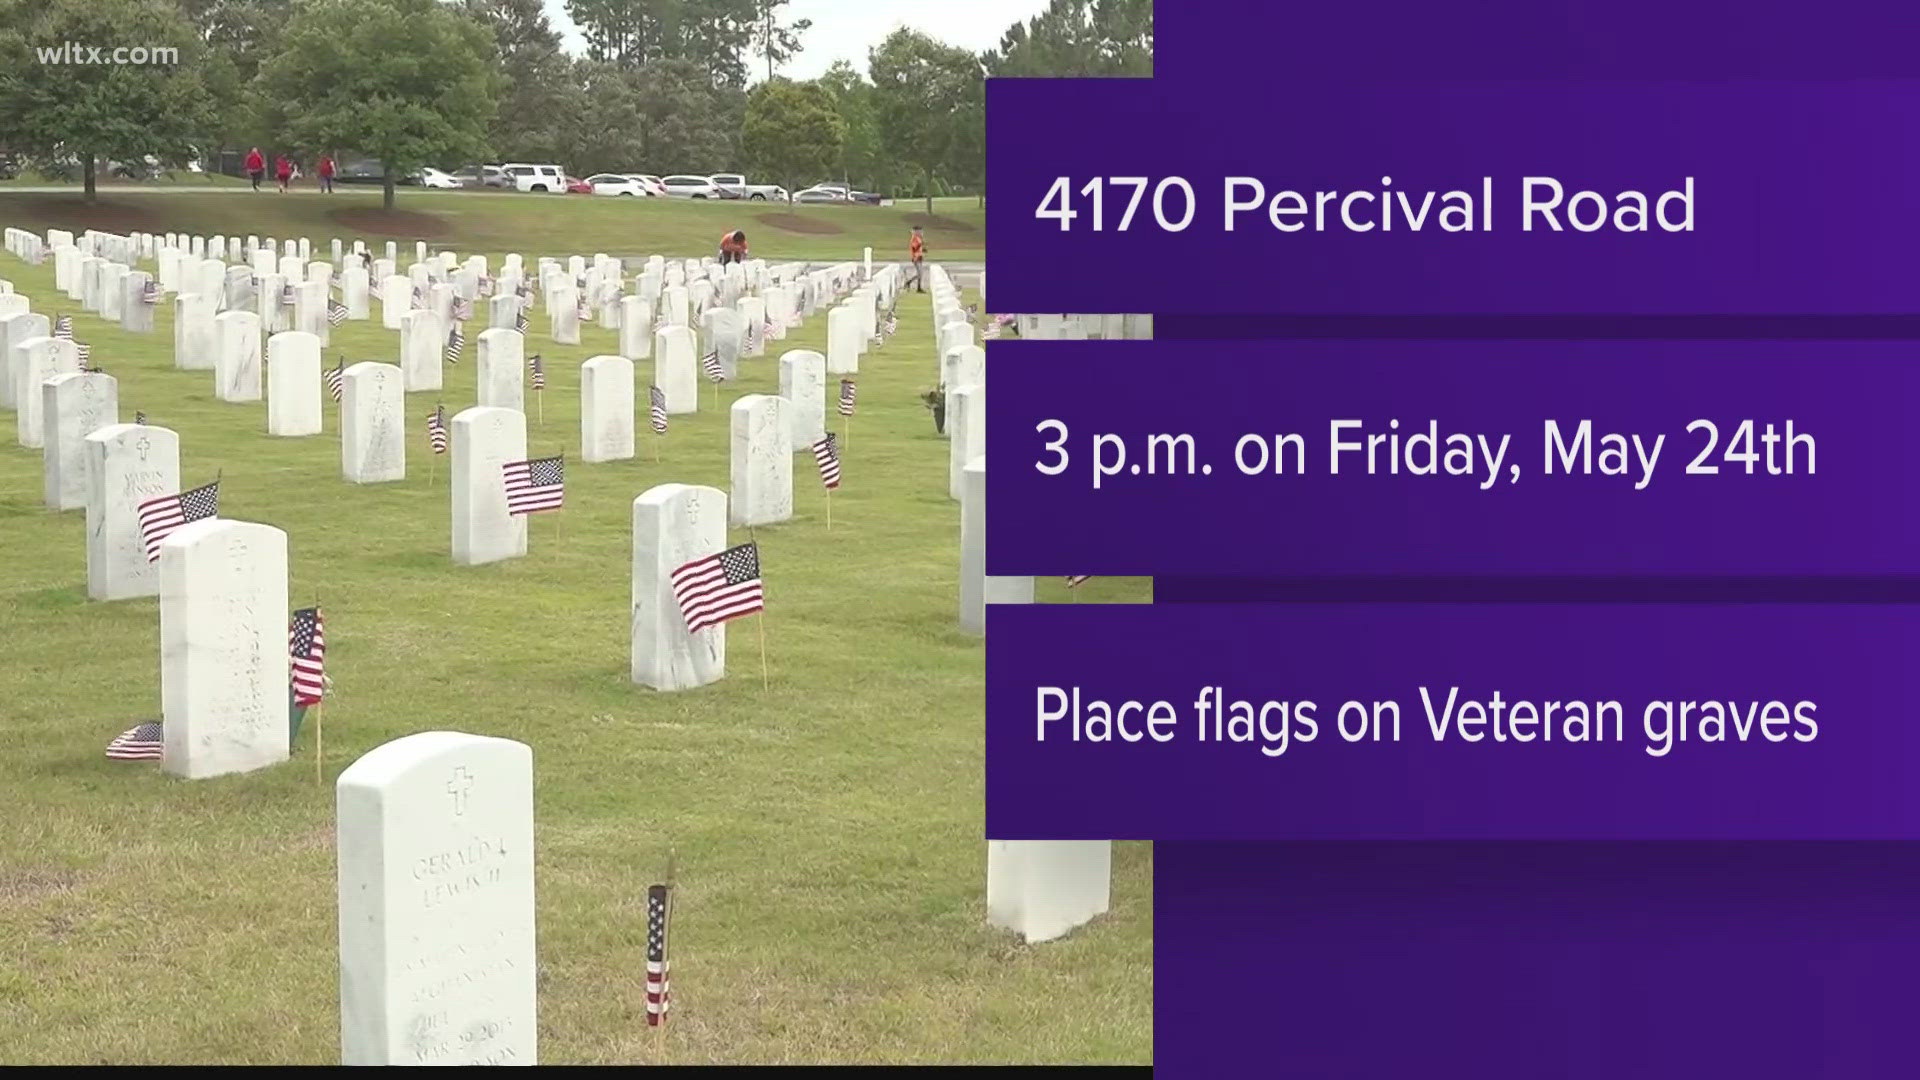 Volunteers are needed next Friday to help place flags on veterans graves.